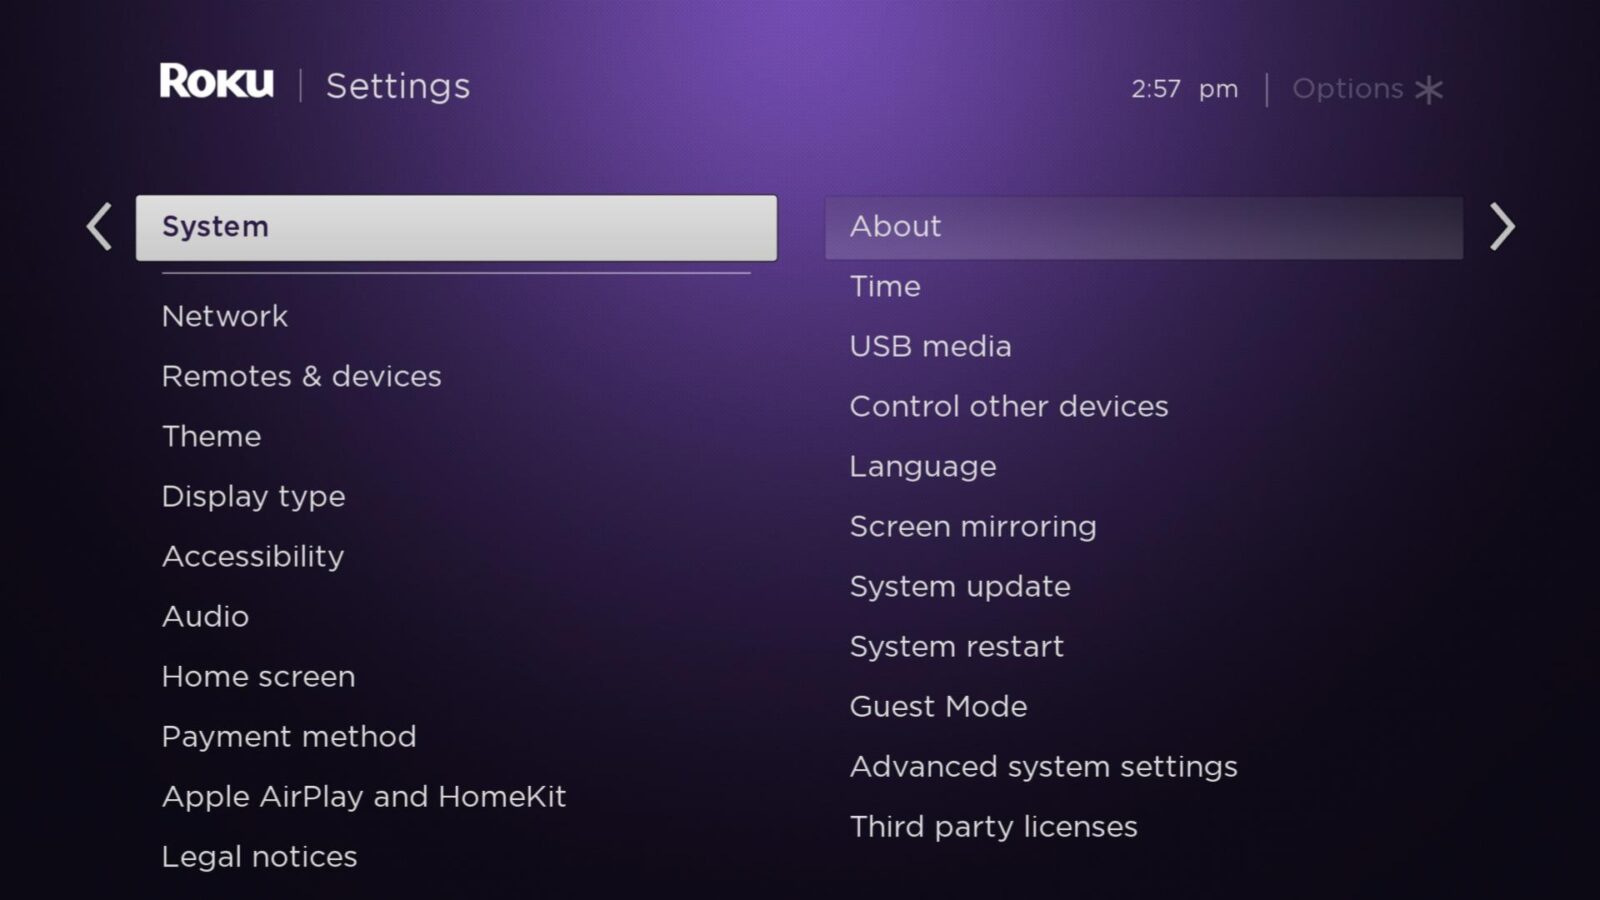 How to Restart Roku Without Unplugging It